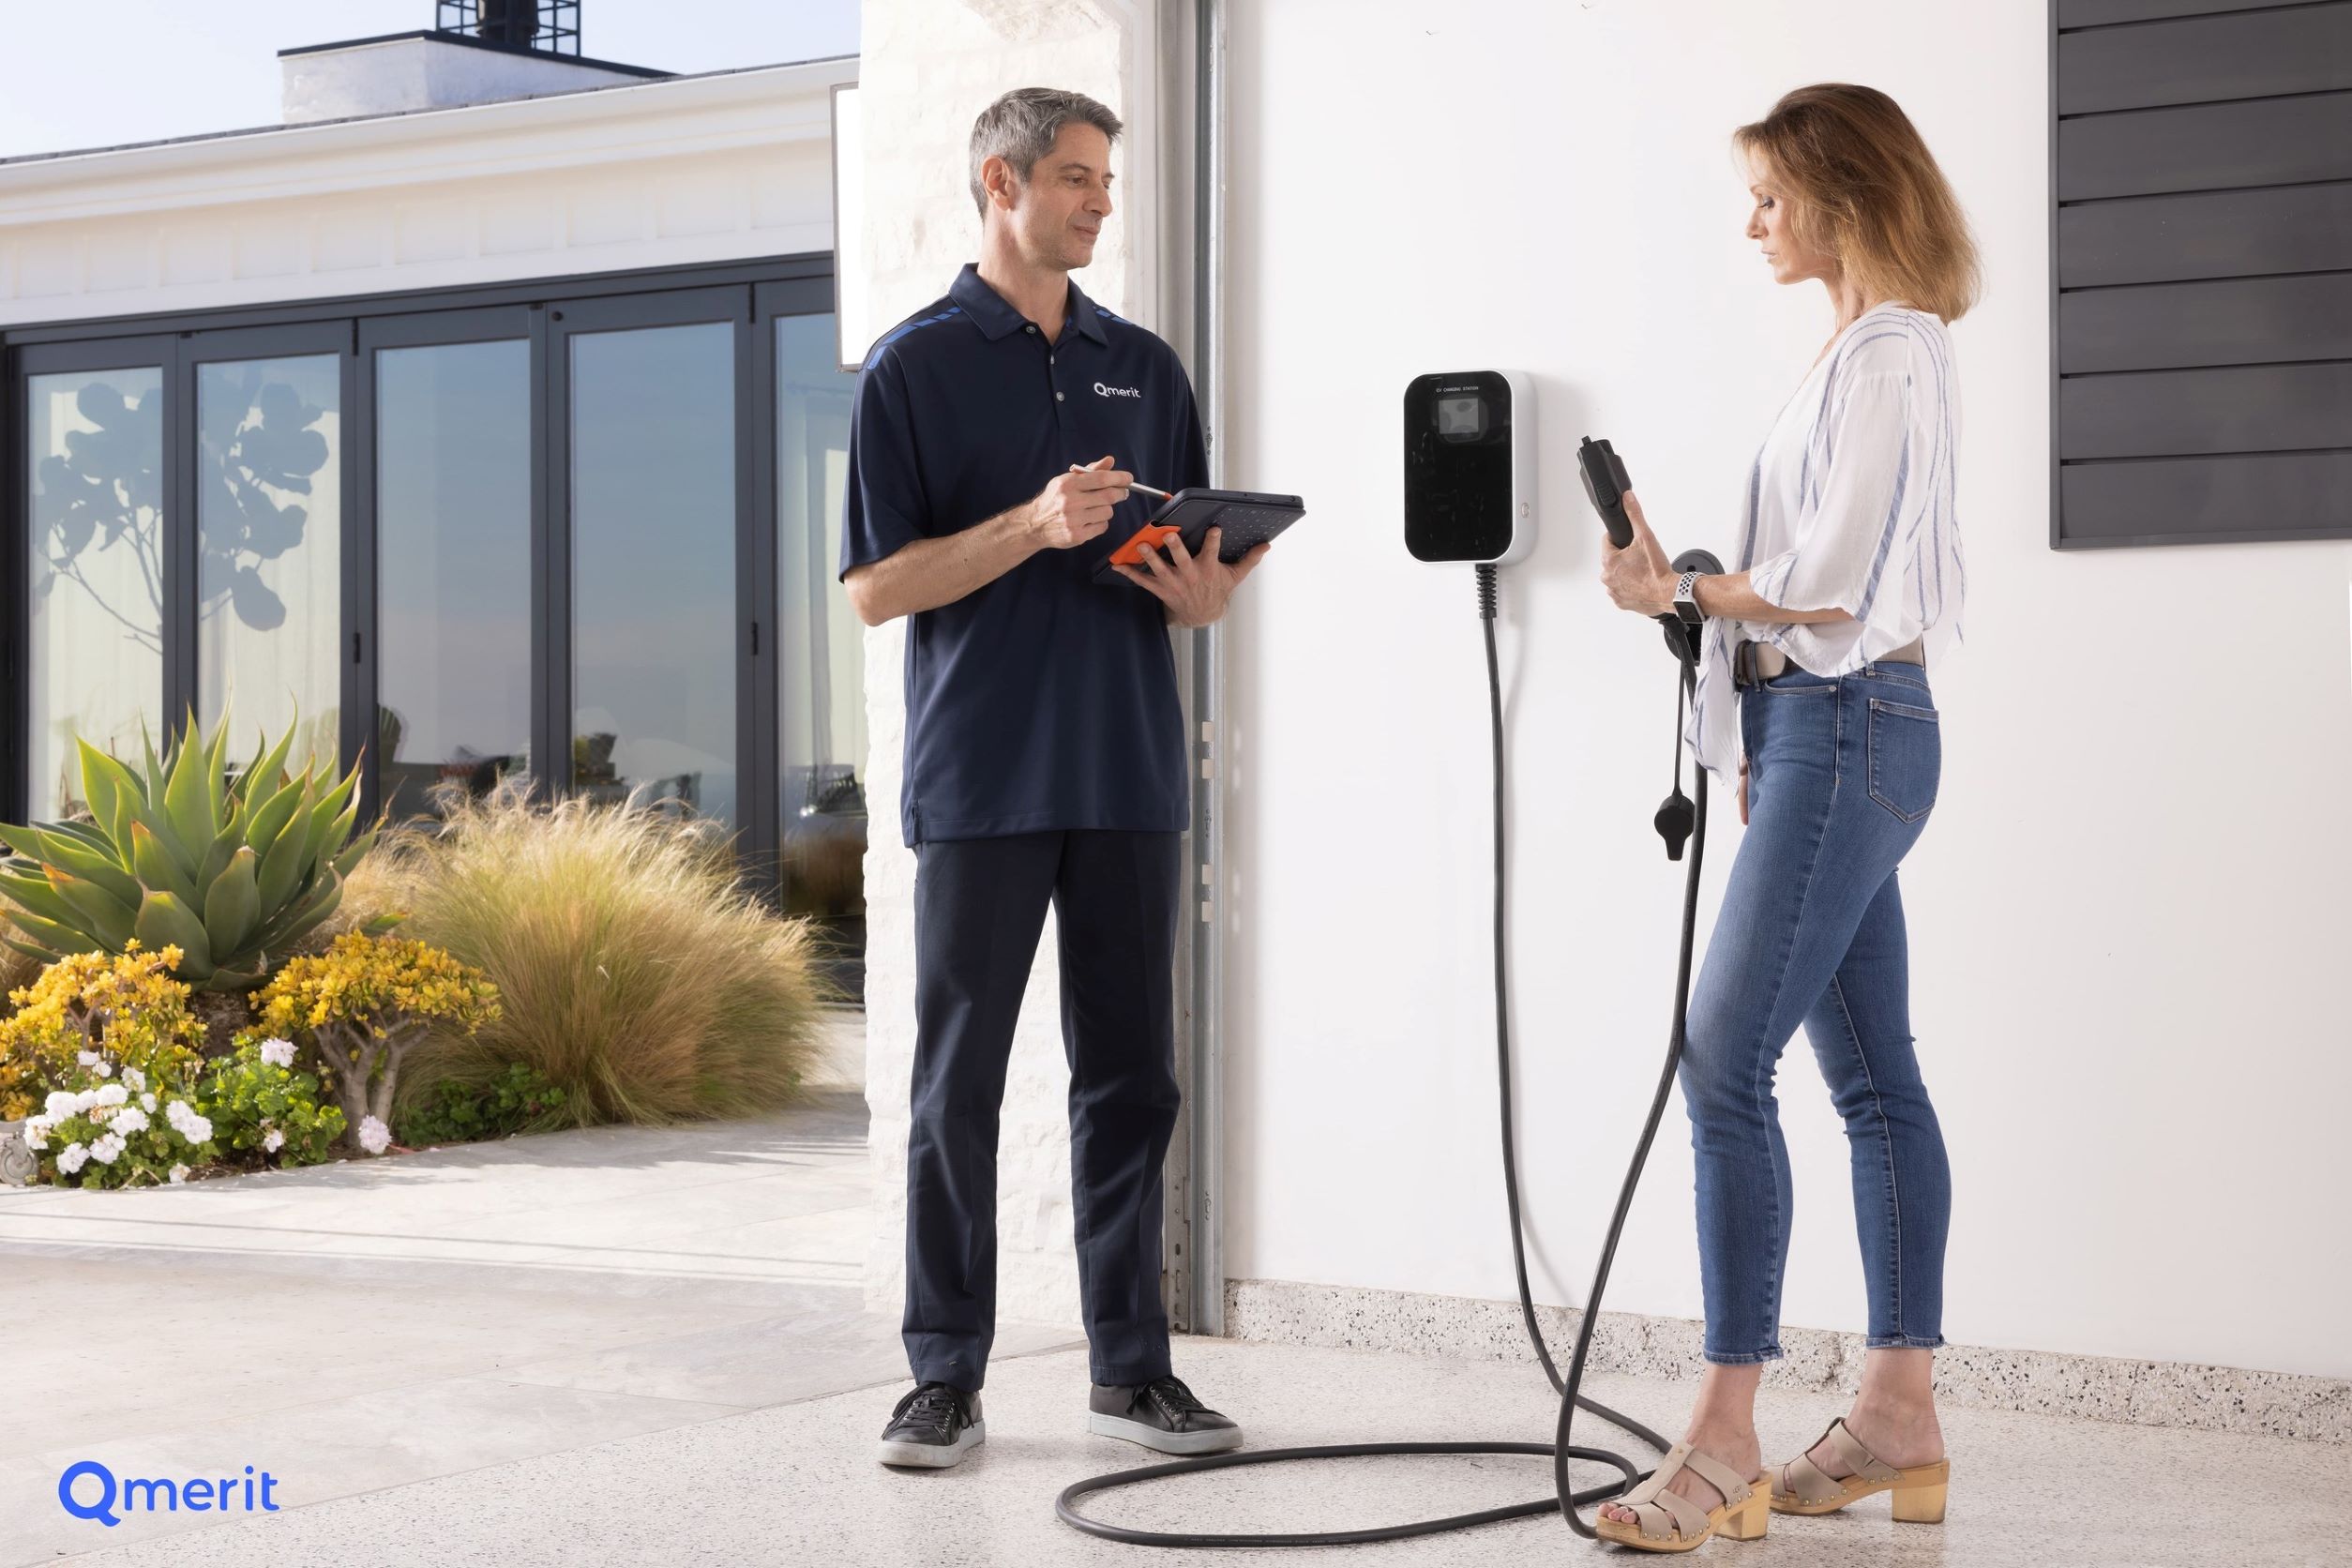 NAPA will offer offer Qmerit's EV charging installation services to buyers